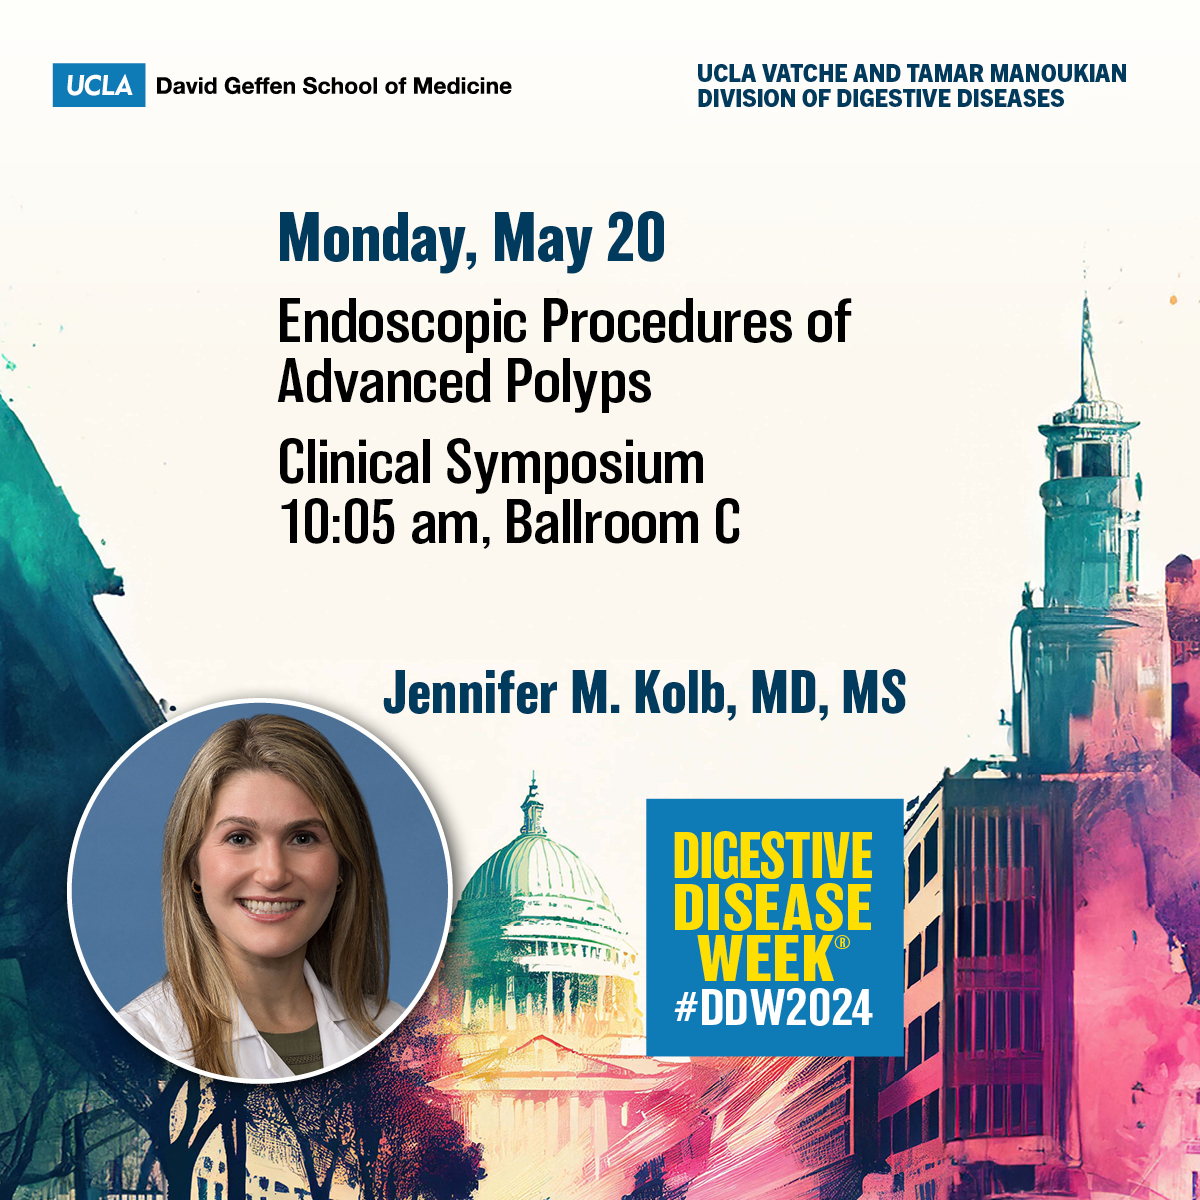 Want to learn more about Endoscopic Procedures of Advanced Polyps?

🔸Jennifer M. Kolb, MD, MS (@JenKolbMD)
🔸#DDW2024 Clinical Symposium
🔸Monday, May 20, 10:05 am, Ballroom C